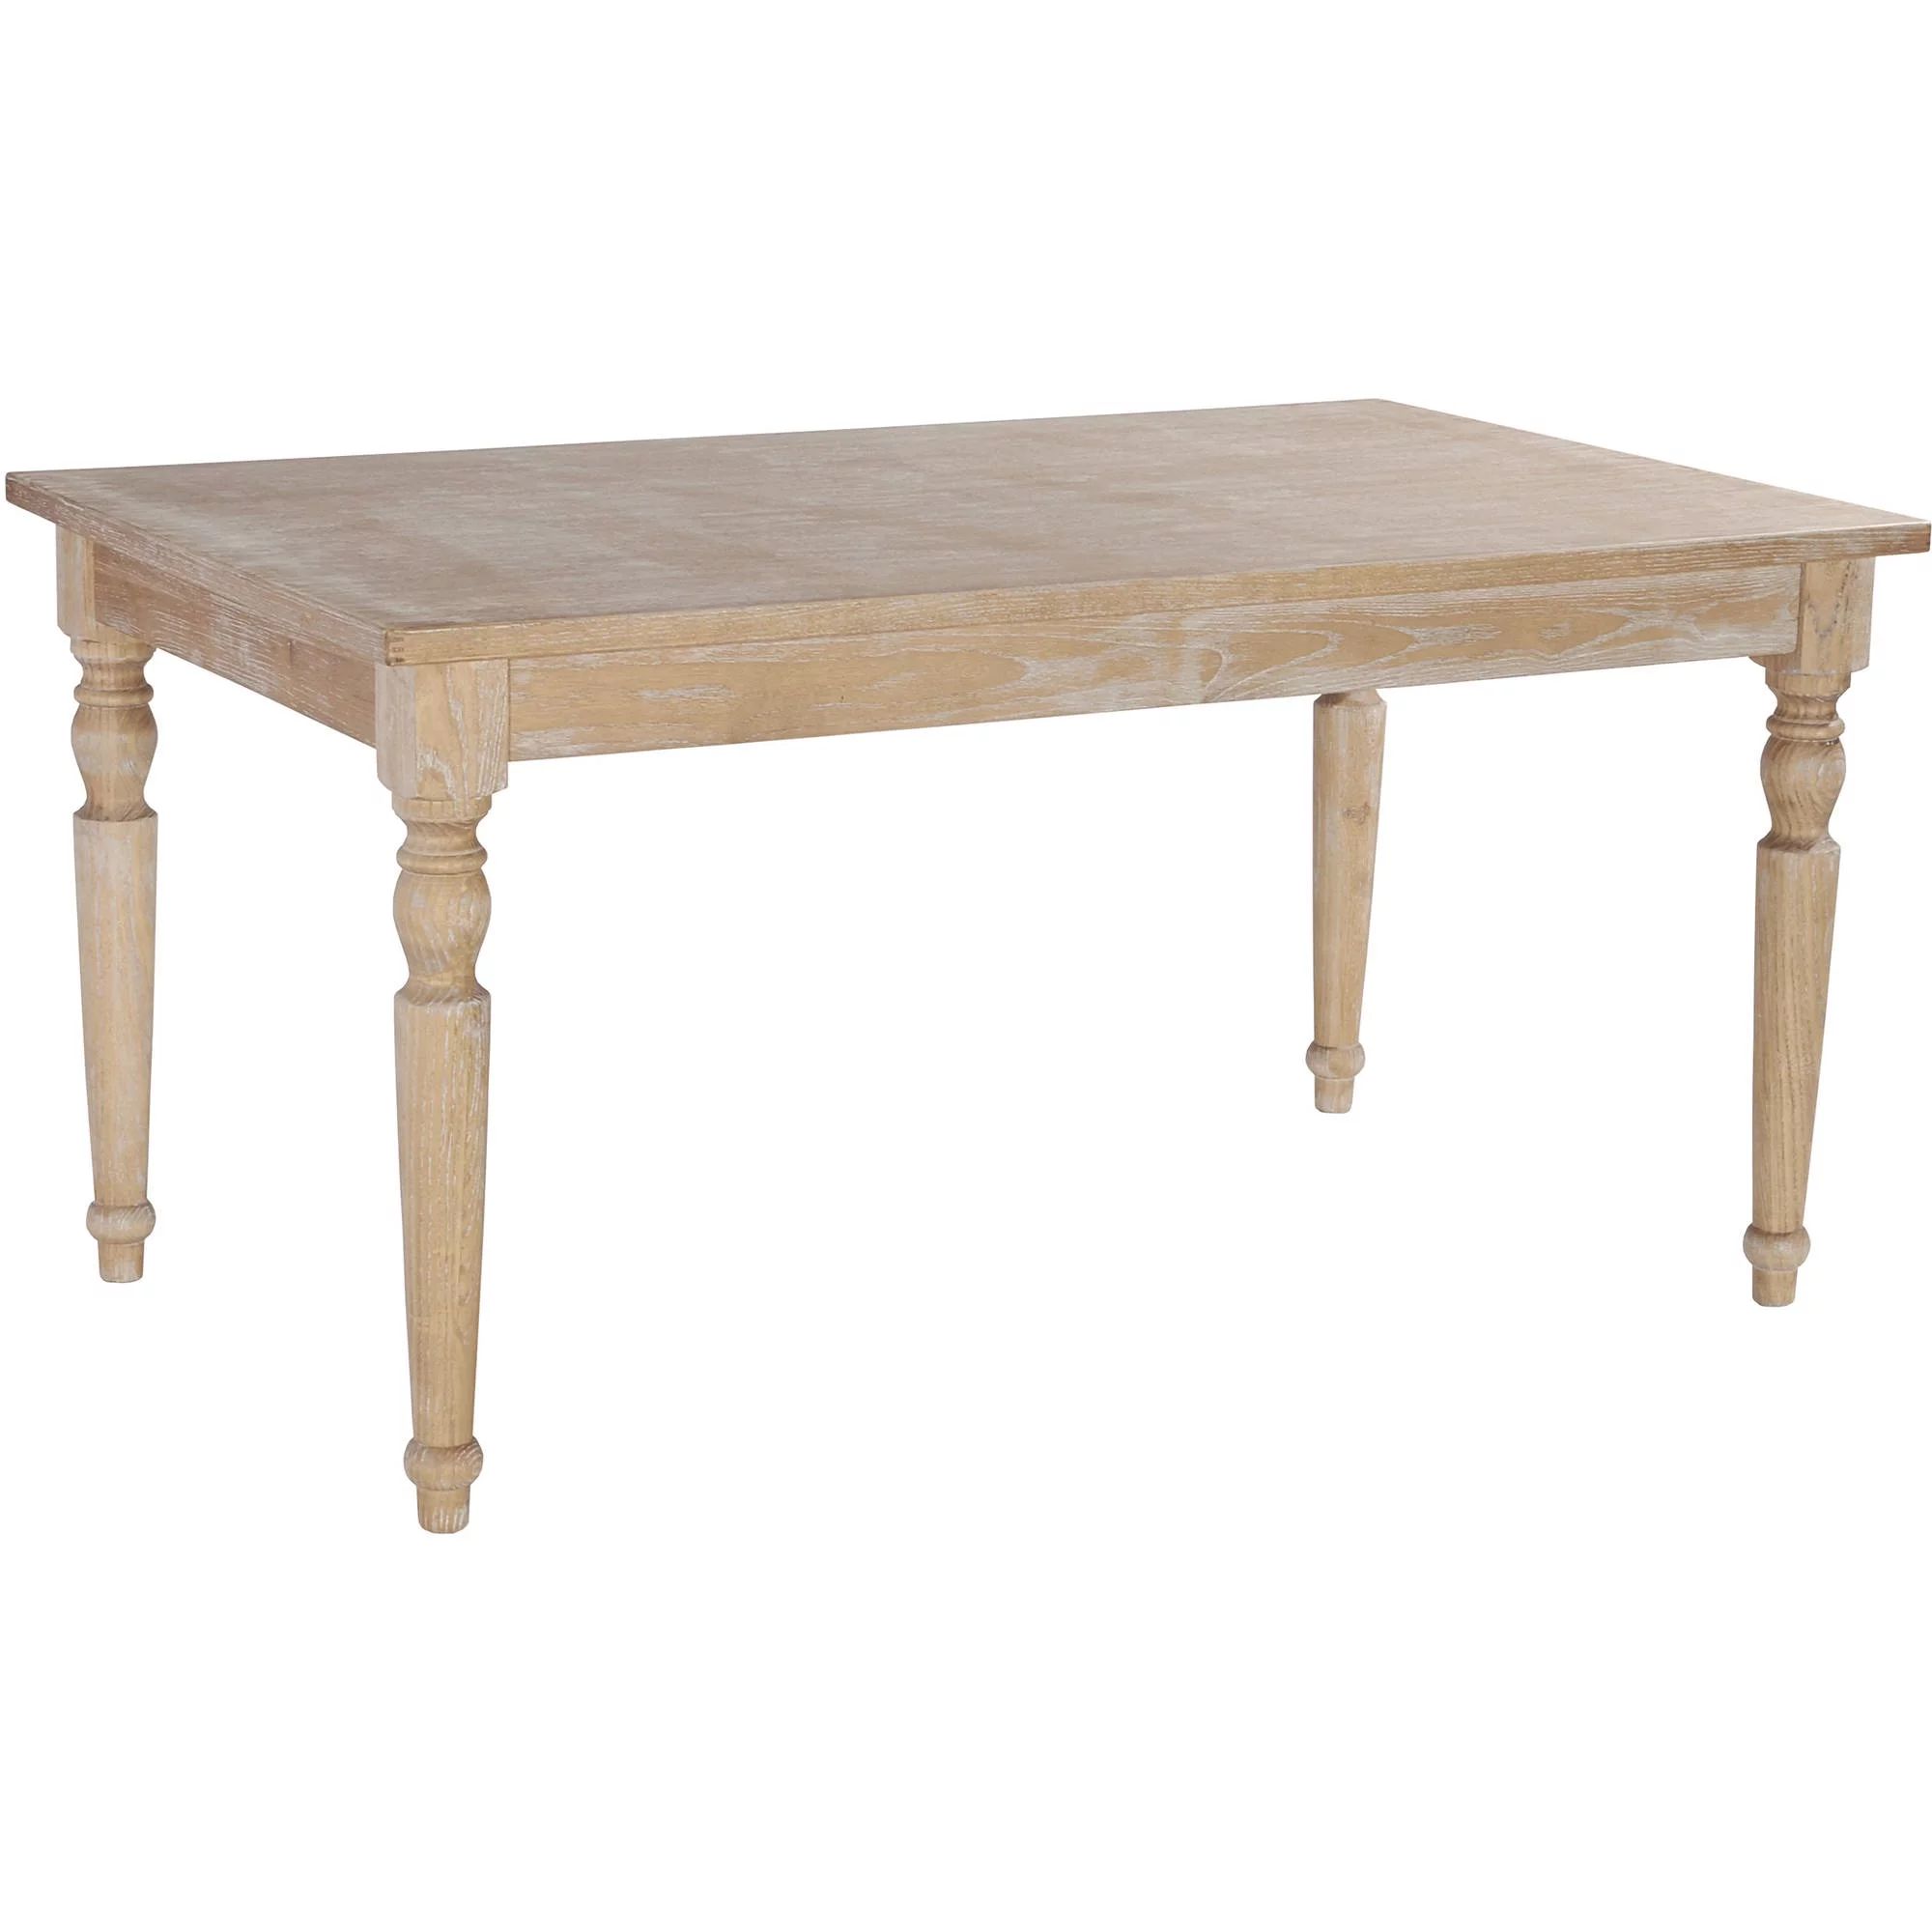 Linon Brighton 59"x36" Rustic Rectangle Dining Table with Turned Legs | Walmart (US)